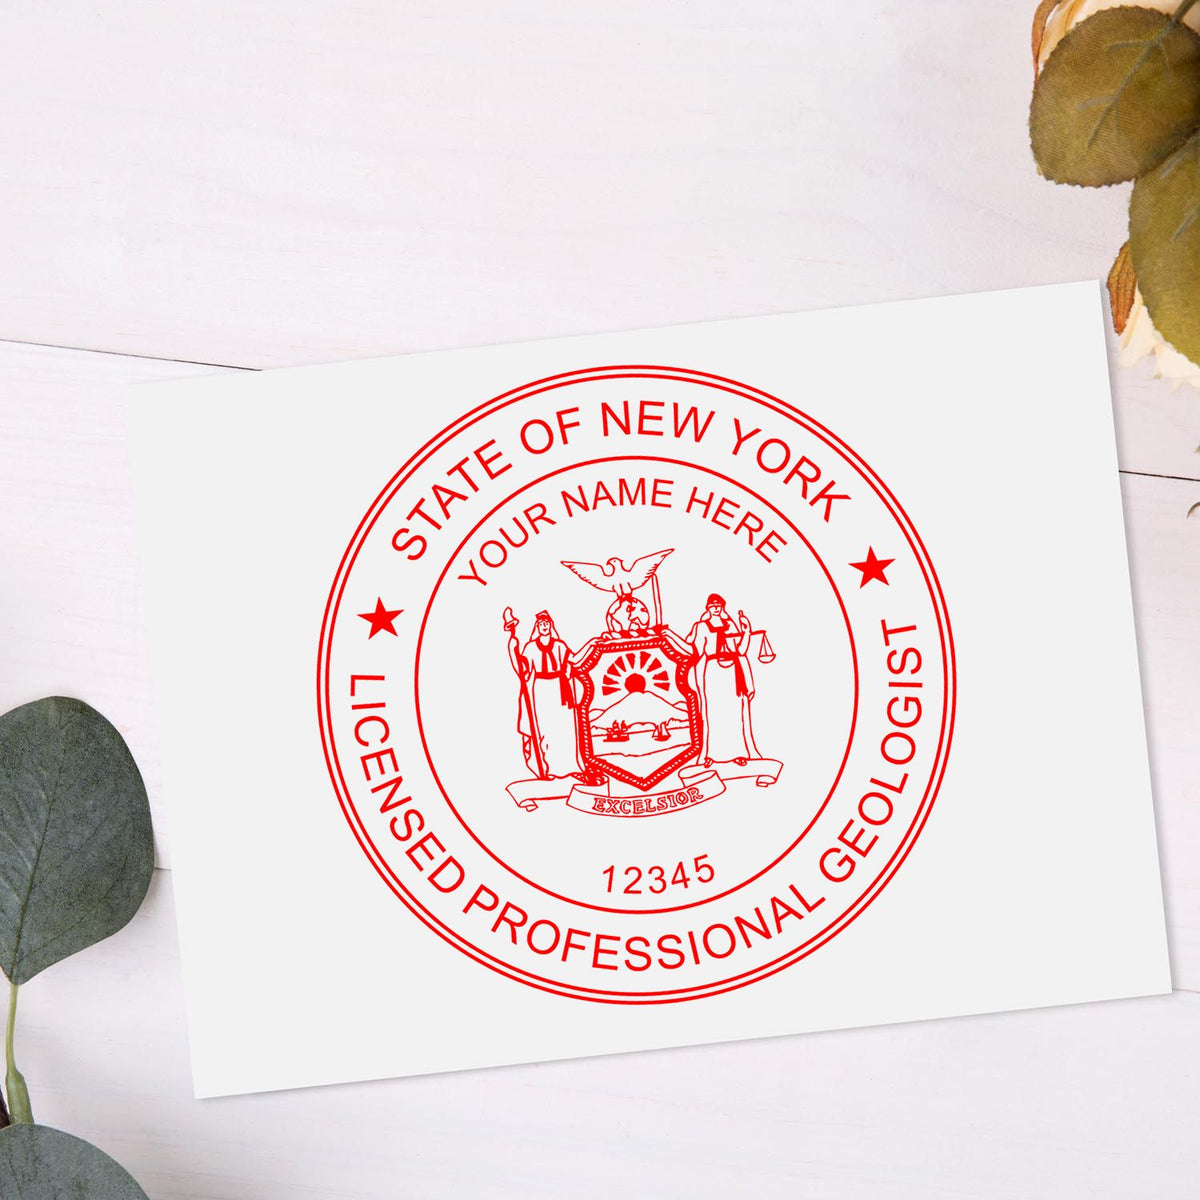 The Digital New York Geologist Stamp, Electronic Seal for New York Geologist stamp impression comes to life with a crisp, detailed image stamped on paper - showcasing true professional quality.